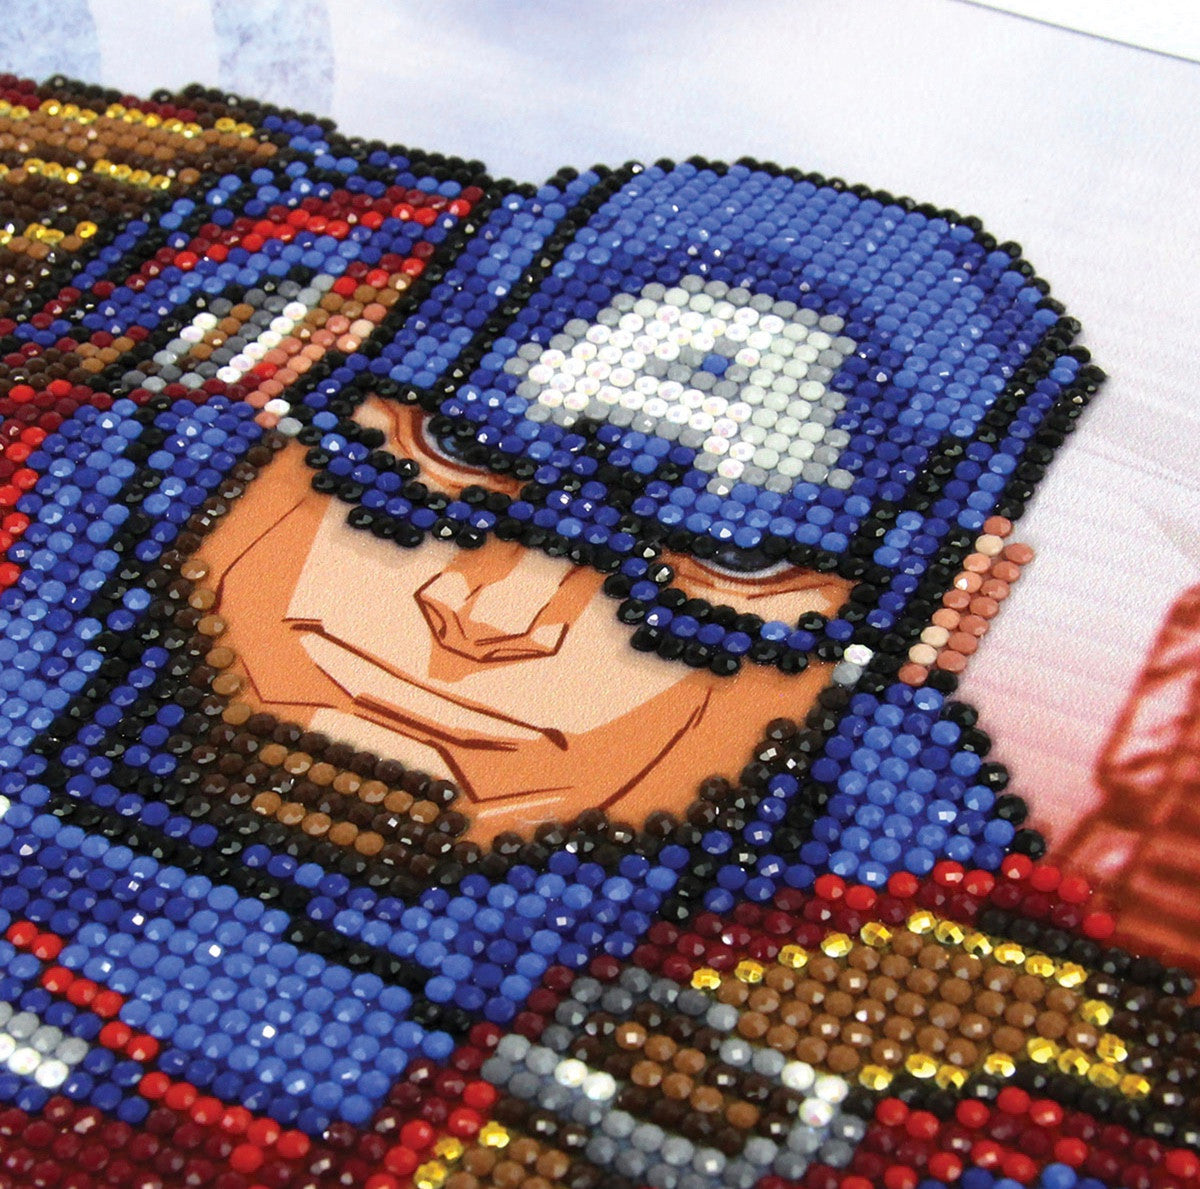 Marvel's Avengers Assemble Diamond Painting Kit by Camelot Dotz®, Introducing Marvel's Avengers Assemble Diamond Painting Kit by Camelot  Dotz®! Transform a color-coded canvas into a sparkling diamond-like  masterpiece —